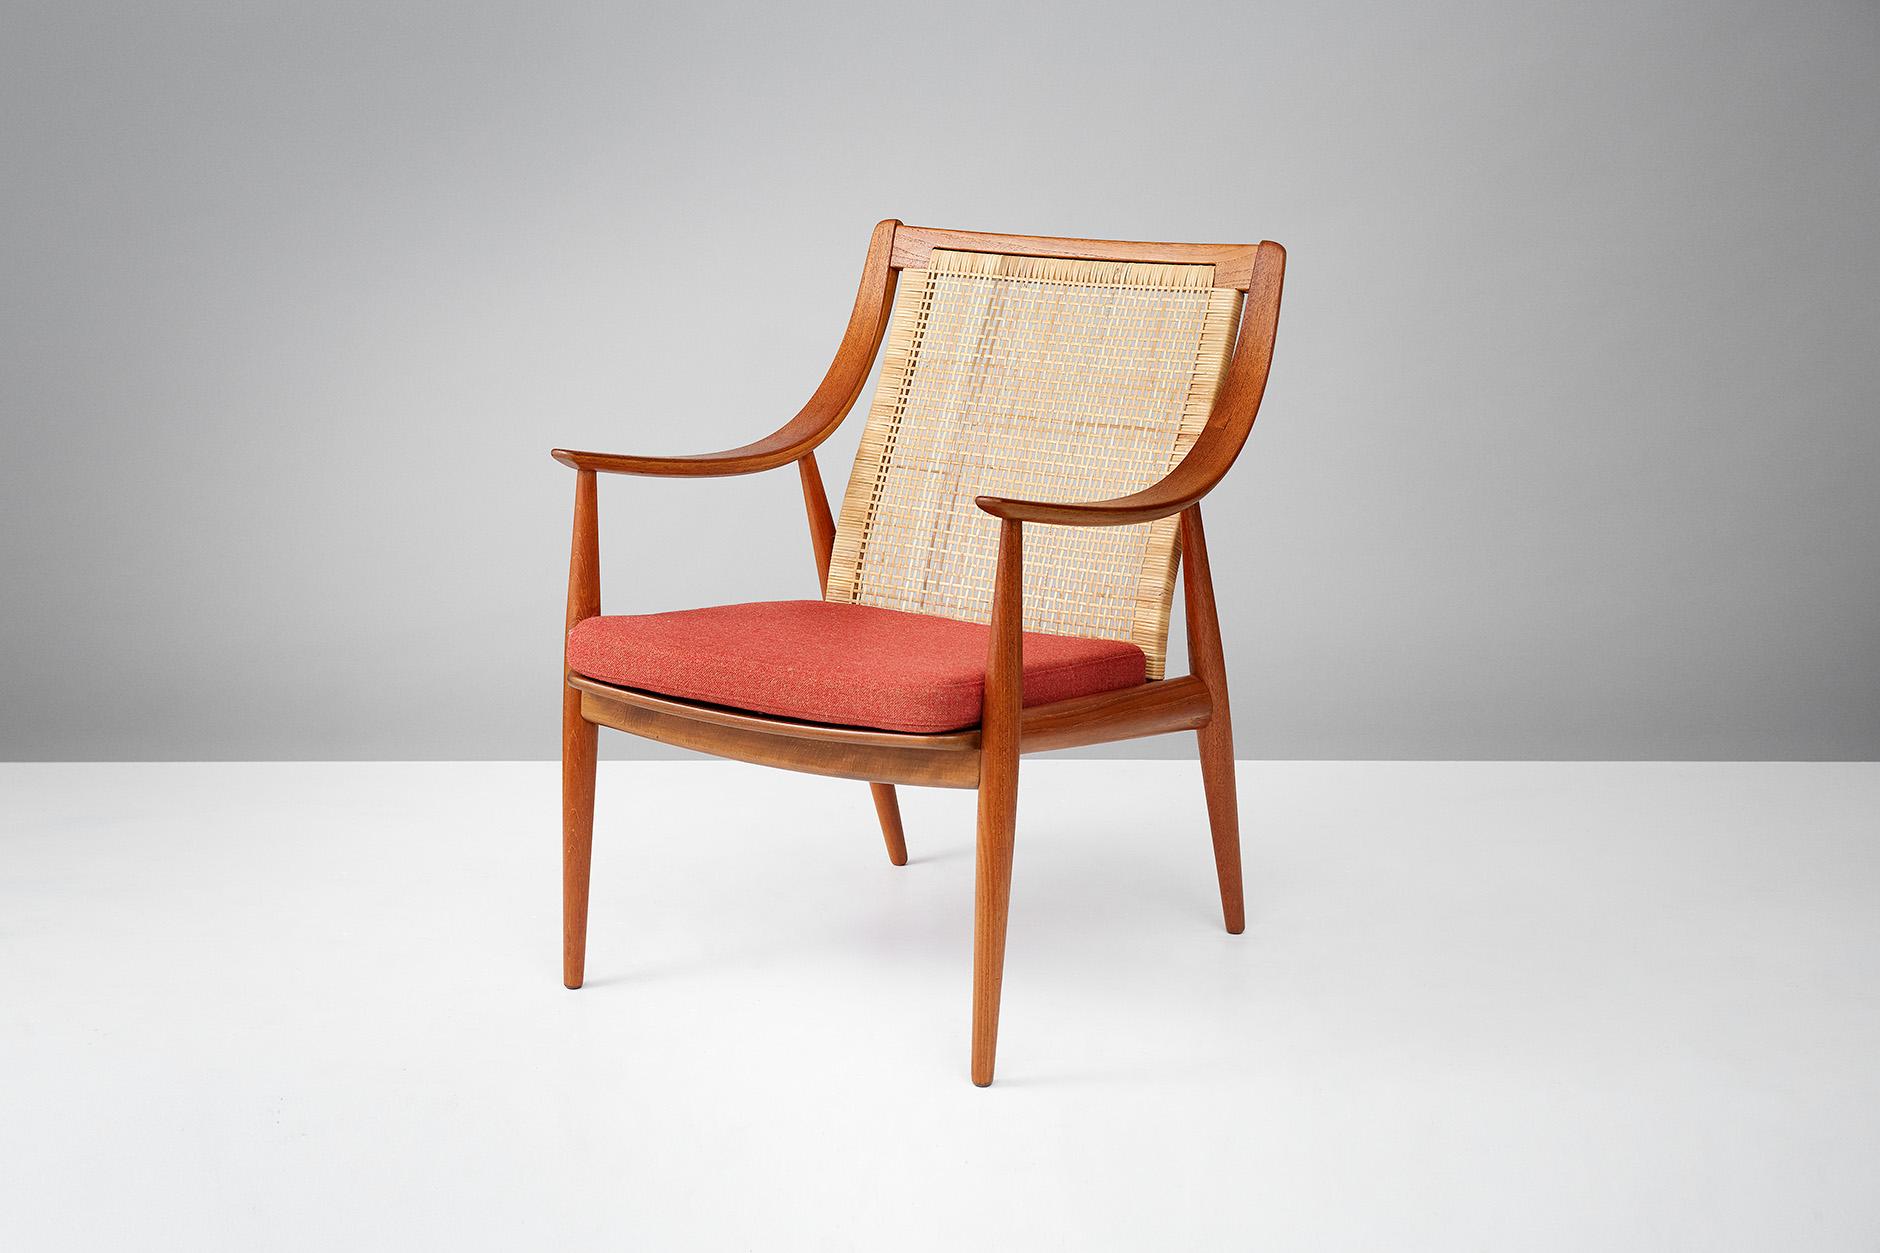 Teak armchair produced by France & Daverkosen, Denmark. Woven rattan back with new seat cushion reupholstered in burnt orange wool fabric.